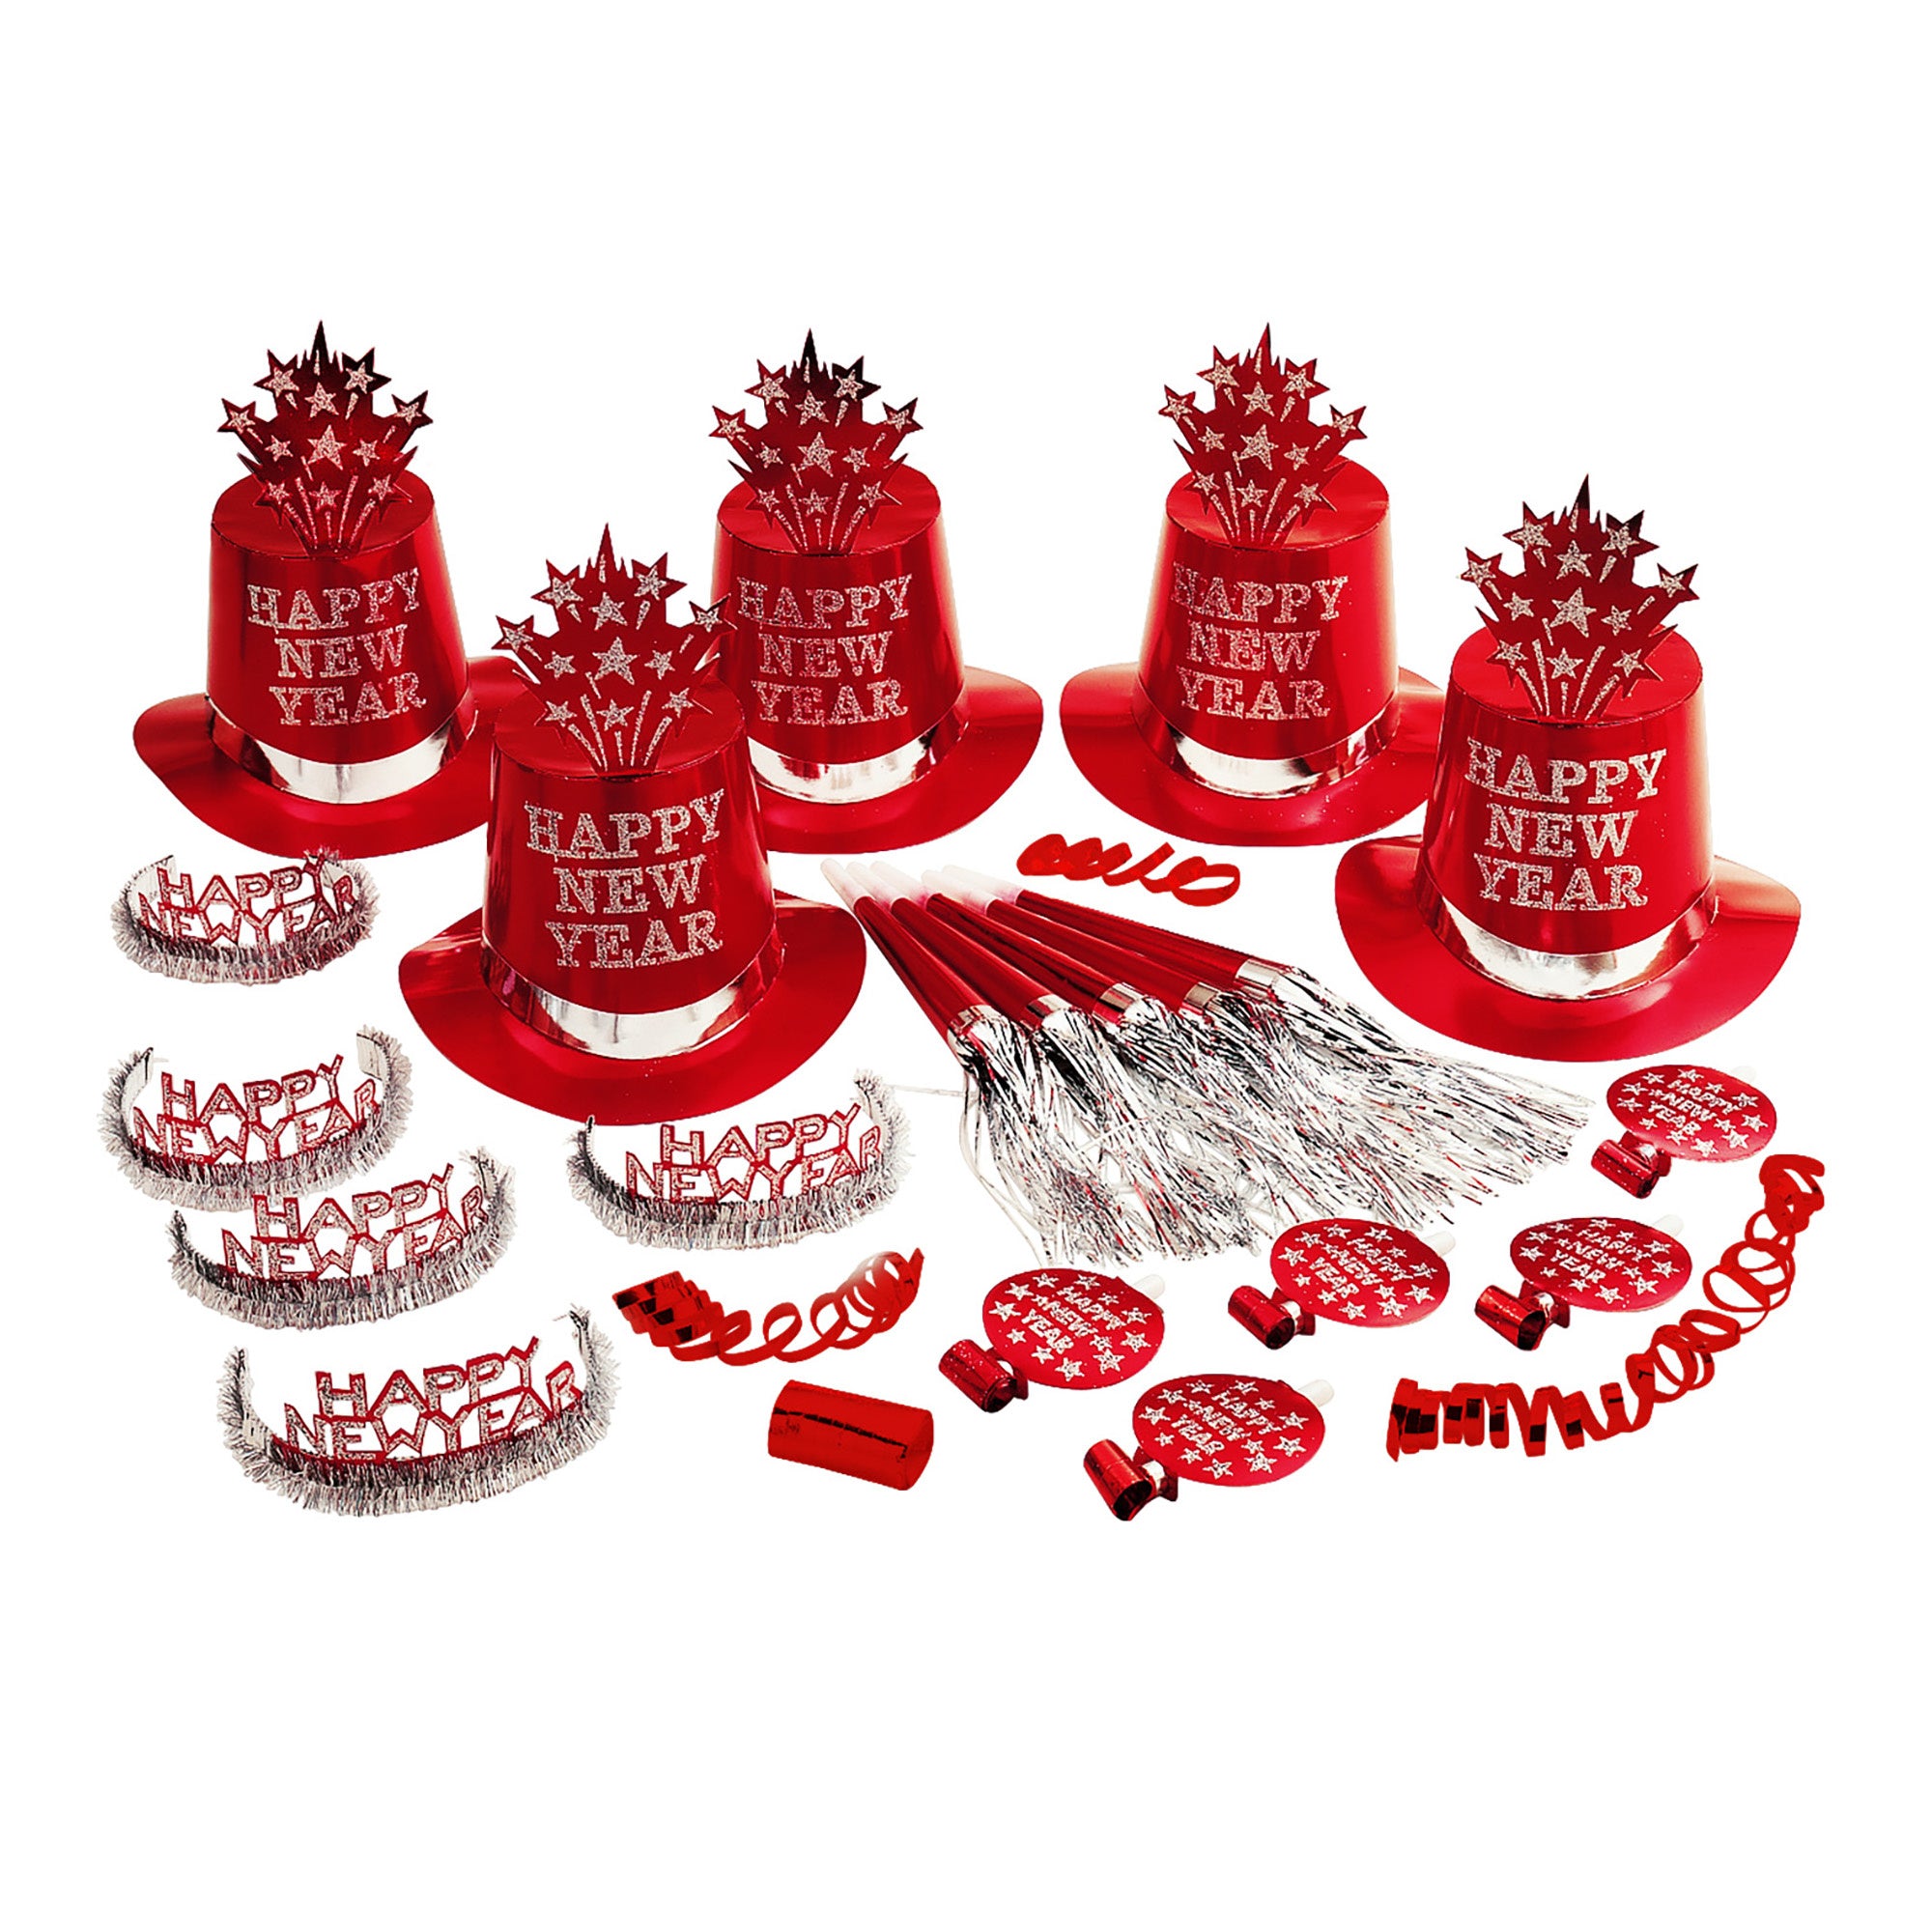 Happy New Year: Red happy new year party kit voor 10 personen